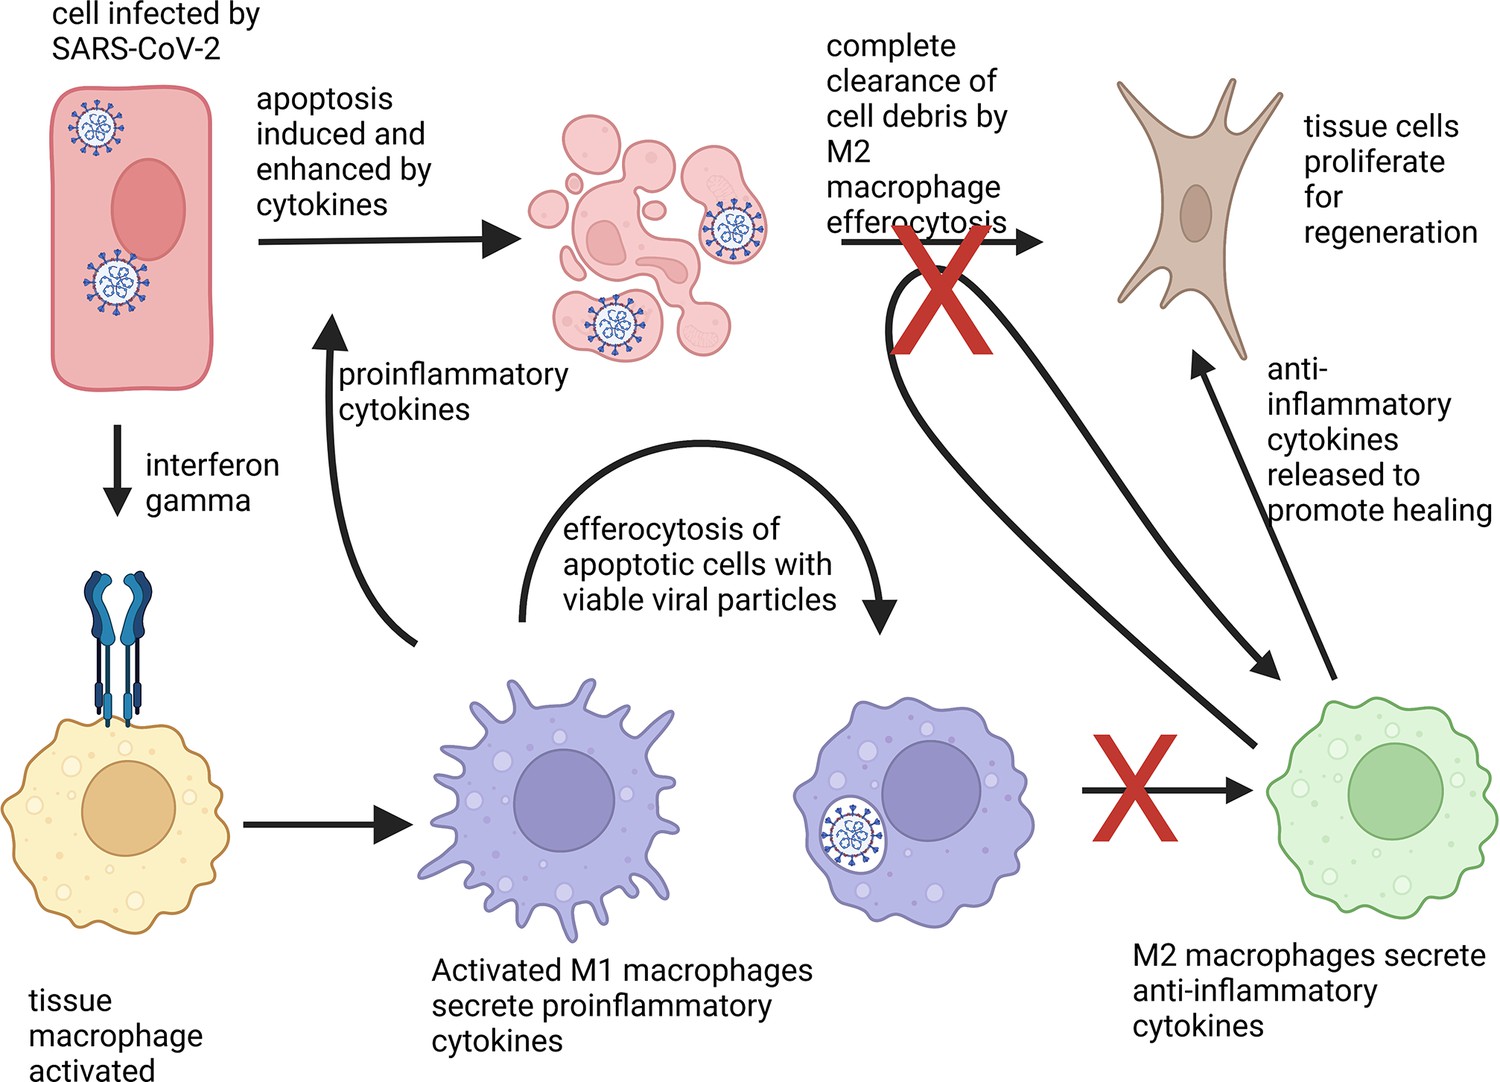 Understanding SARS-CoV-2-Mediated Inflammatory Responses: From